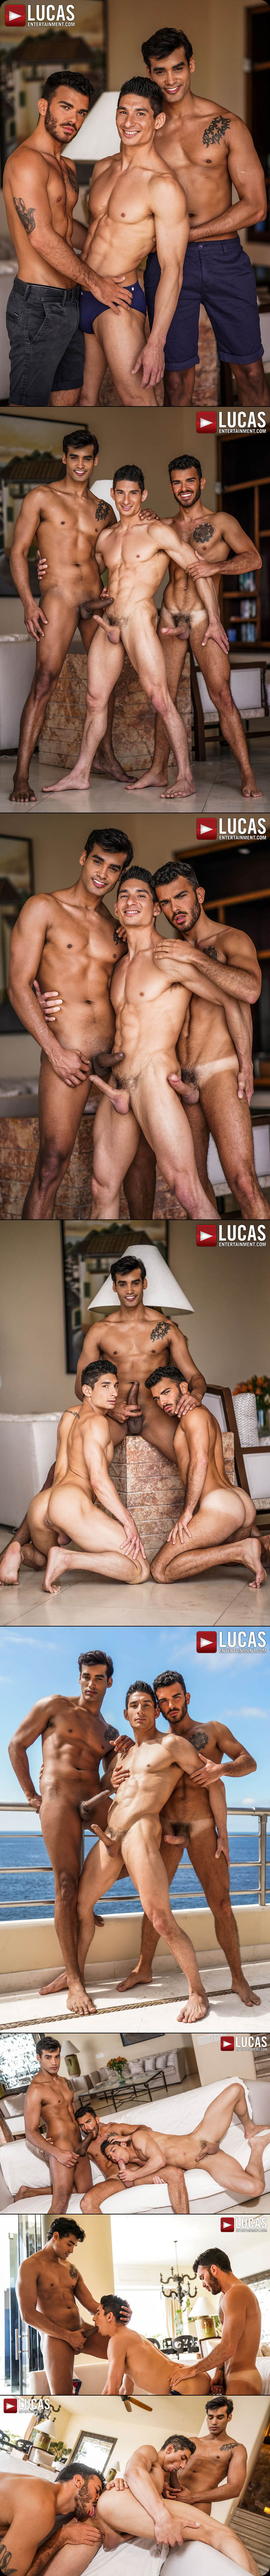 Punishing Some Hole, Scene 2 (Marco Antonio And Pol Prince Spit-Roast Jim Fit) at LucasEntertainment